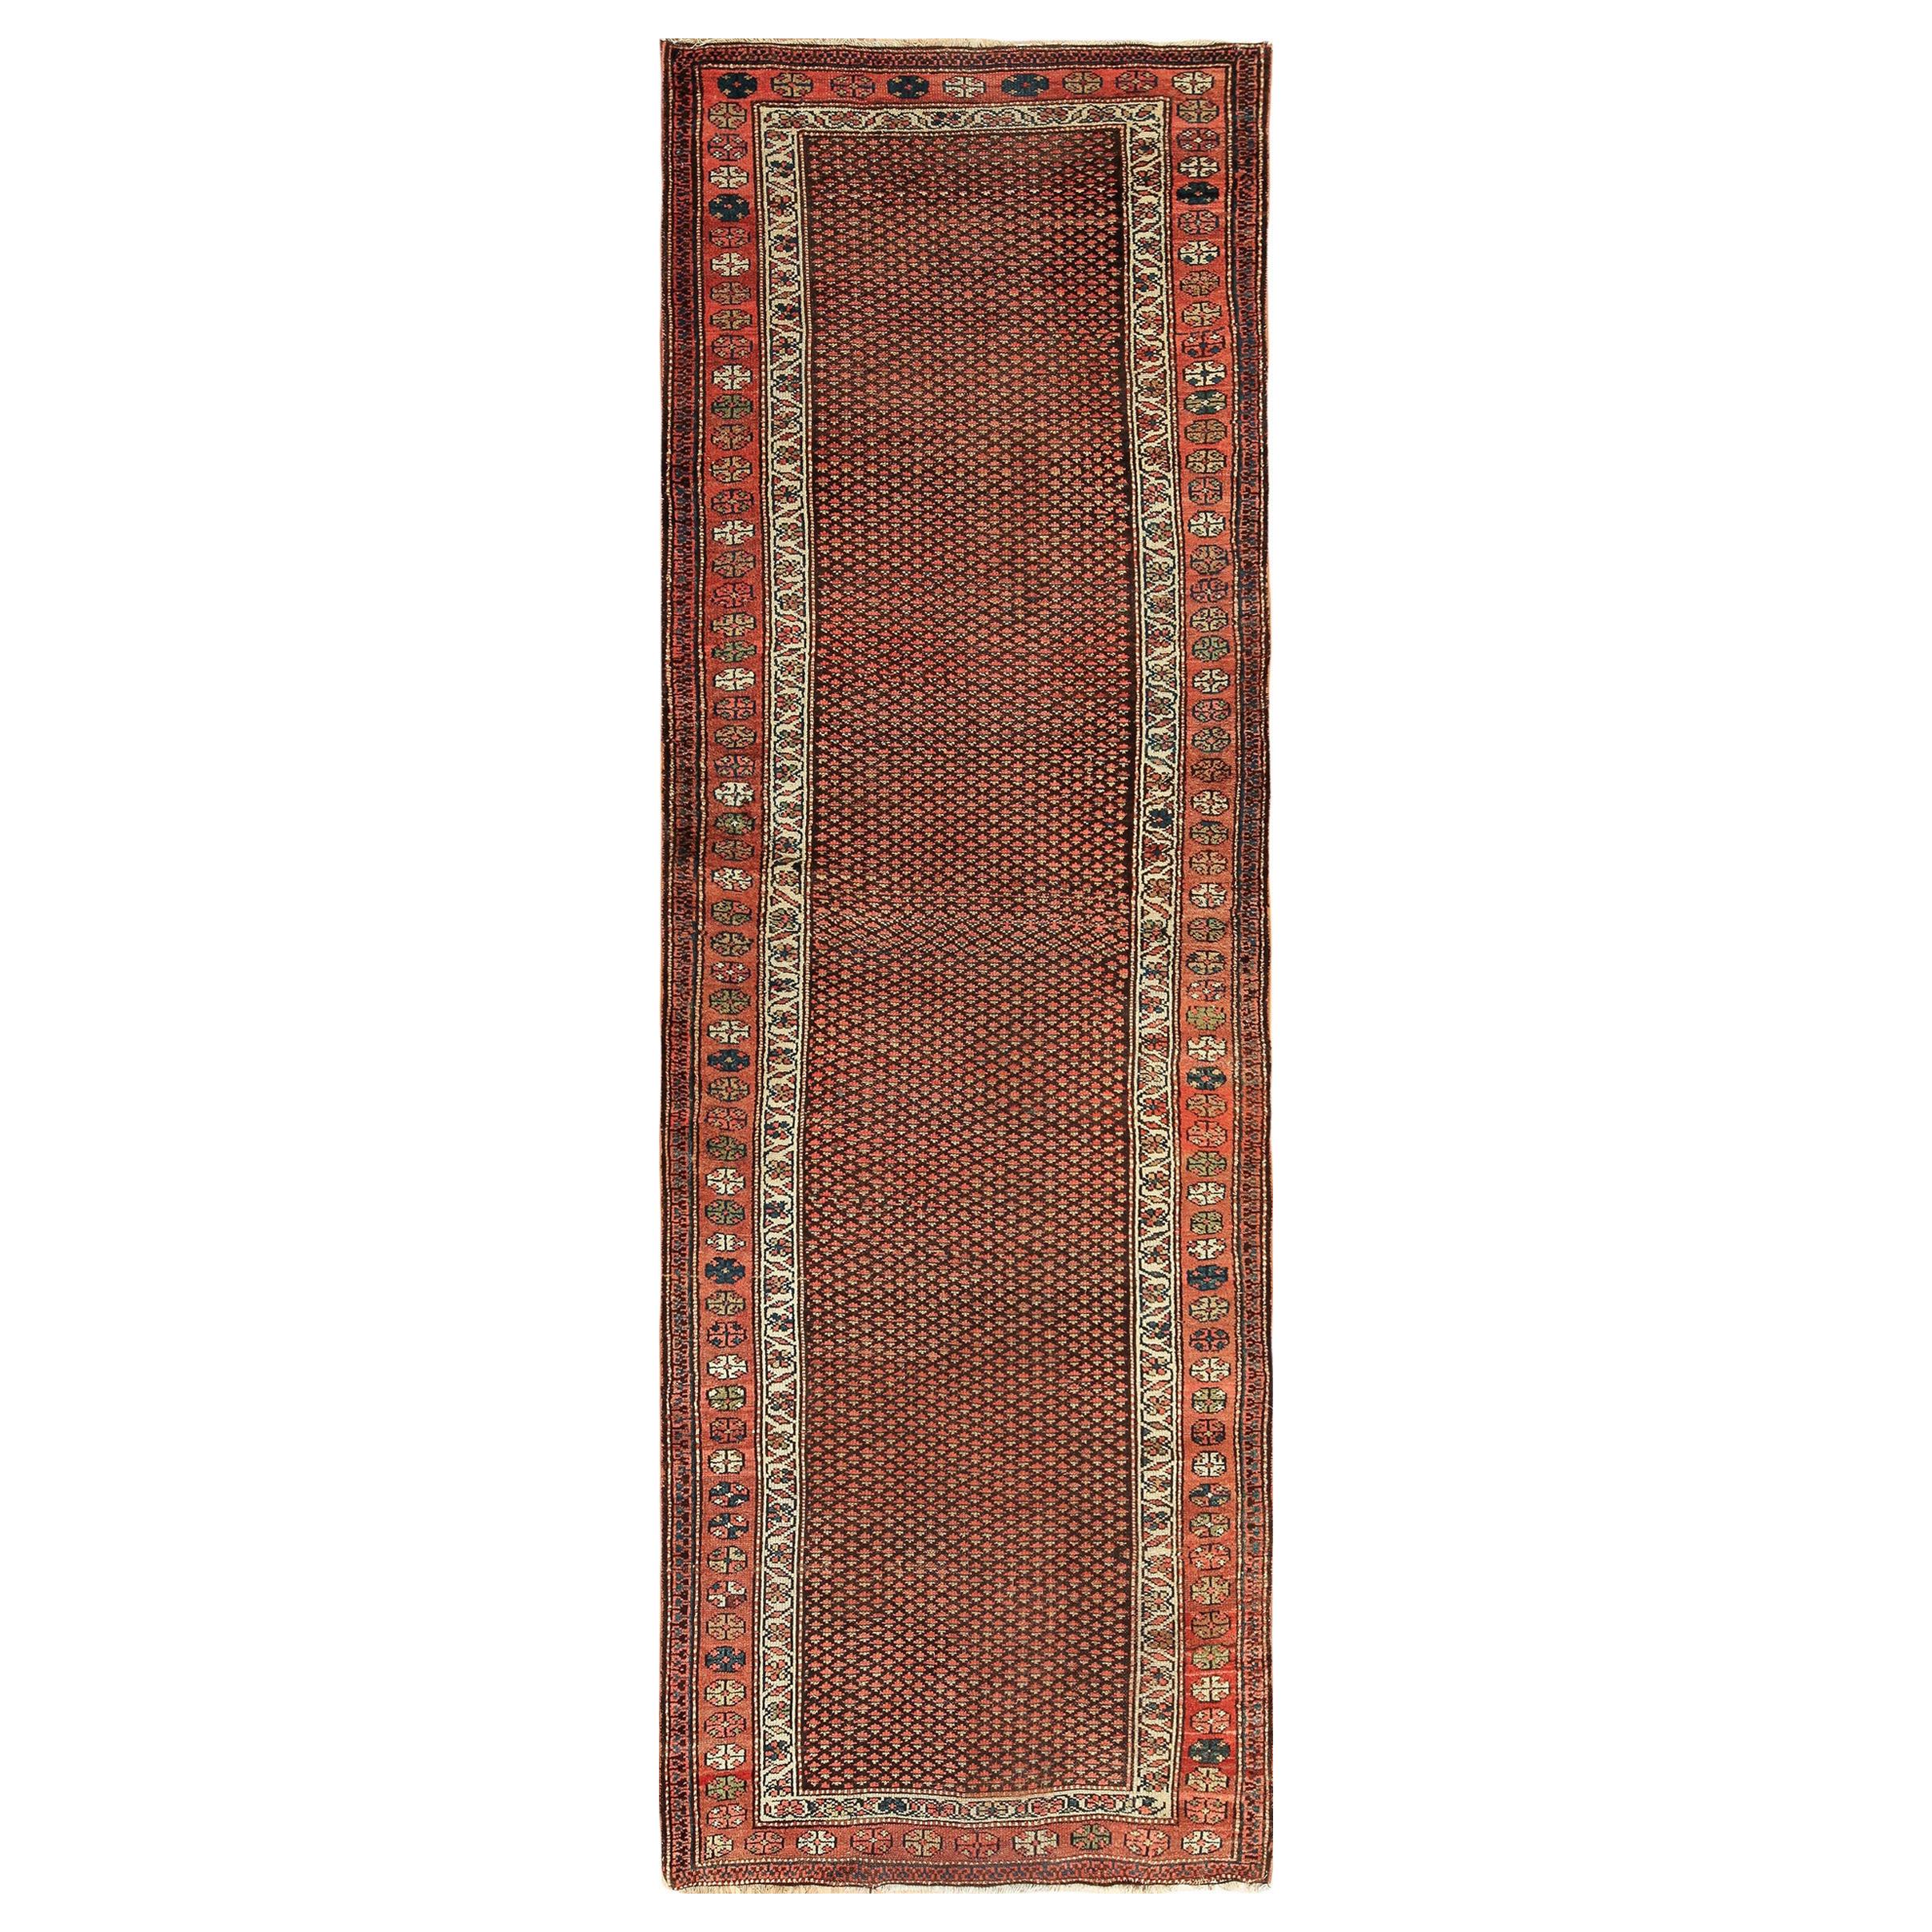 Antique Northwest Persian Runner Rug. Size: 3 ft 4 in x 10 ft 4 in 